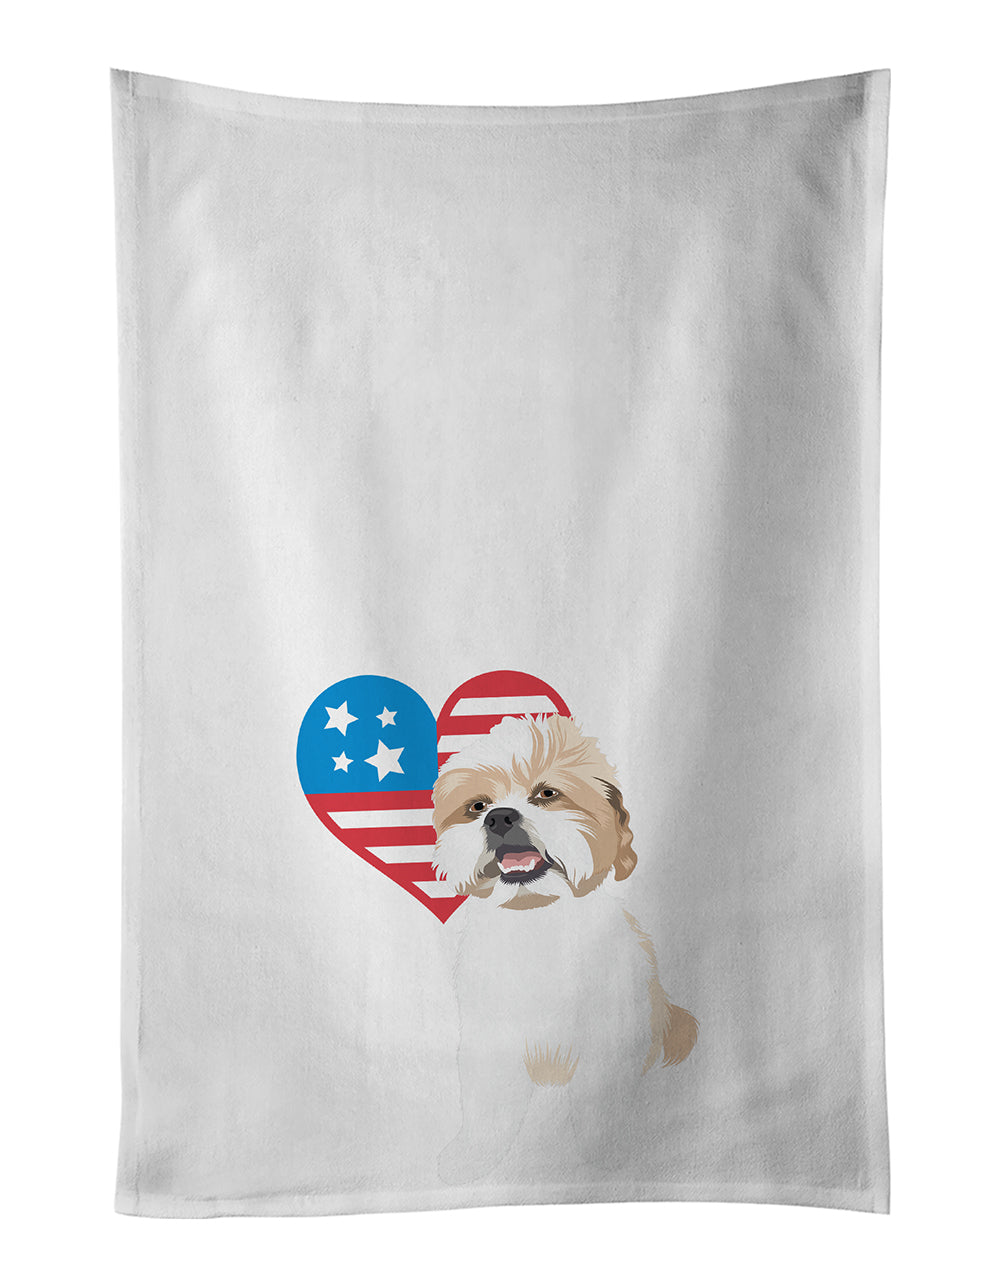 Buy this Shih-Tzu Silver Gold and White #2 Patriotic White Kitchen Towel Set of 2